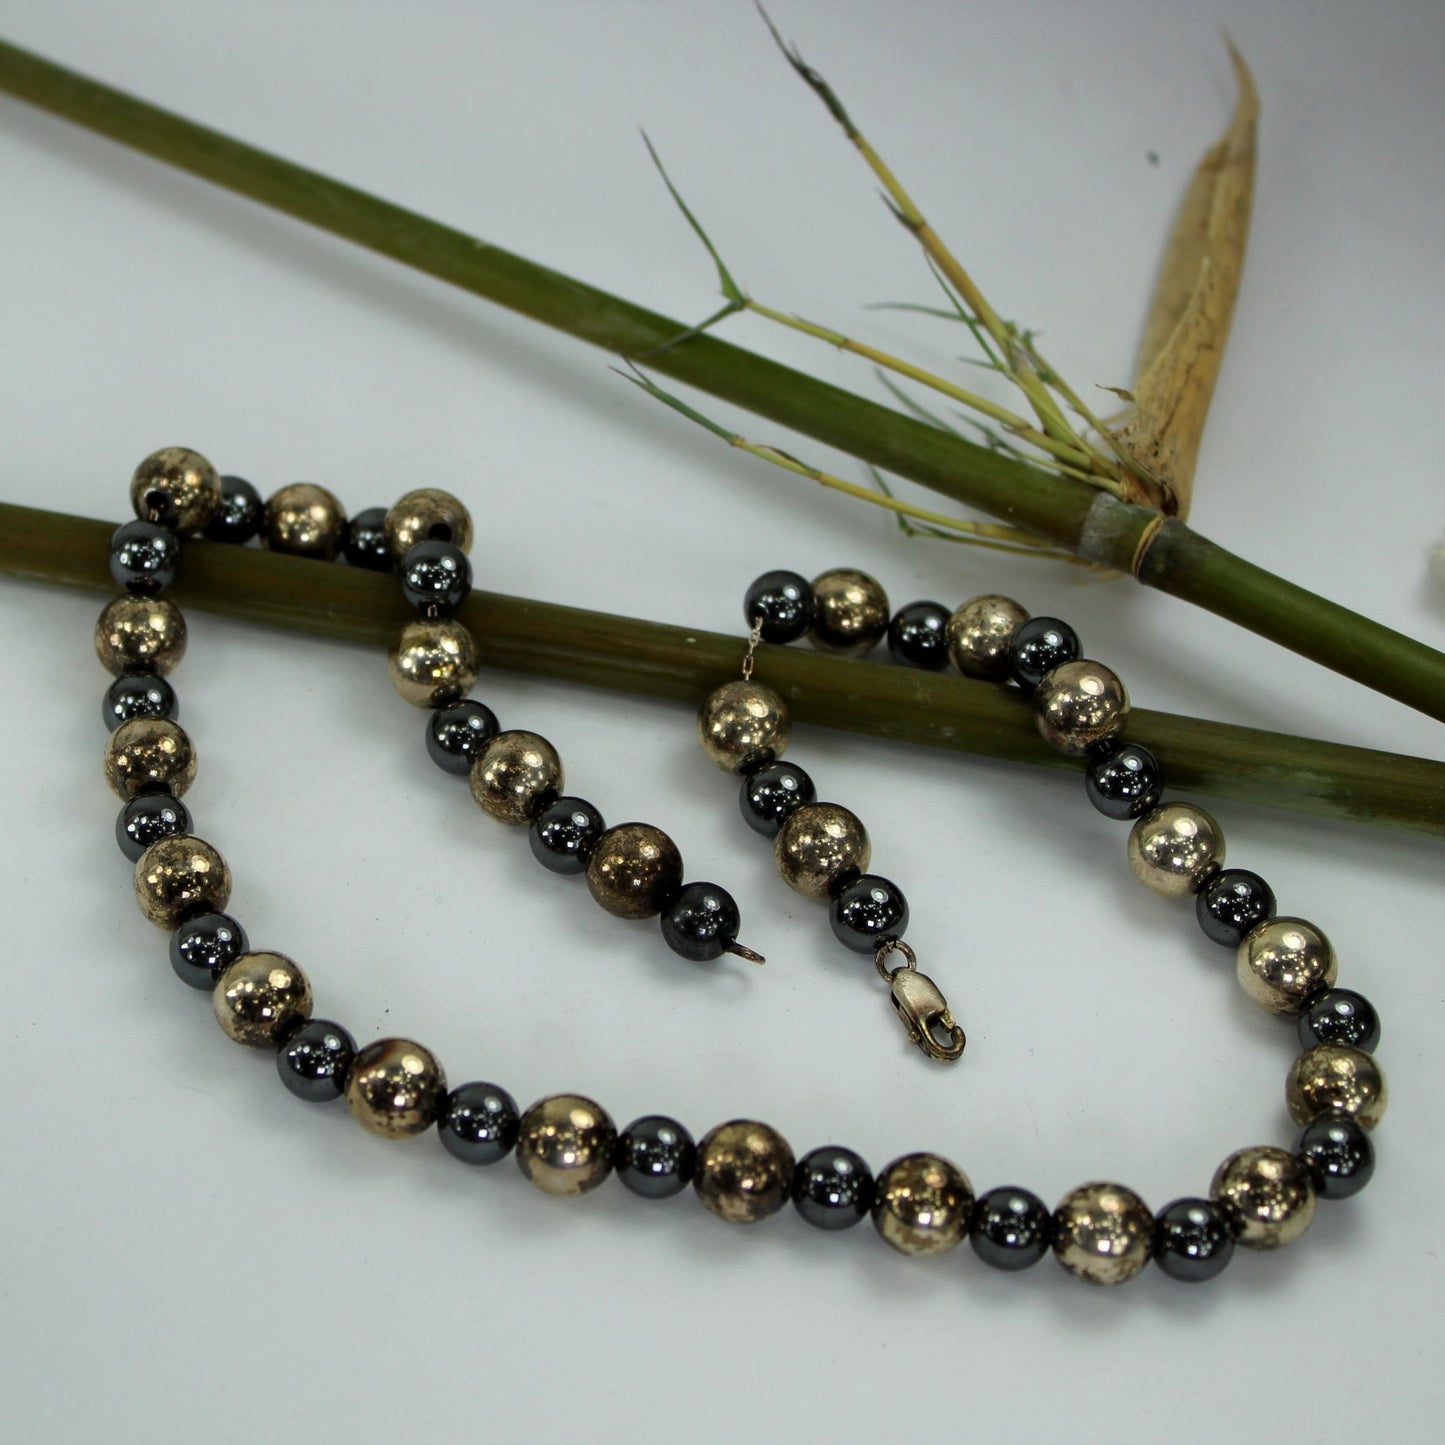 Metal Bead Necklace Silver Black Alternating Beads Chain Strung 925 Closure